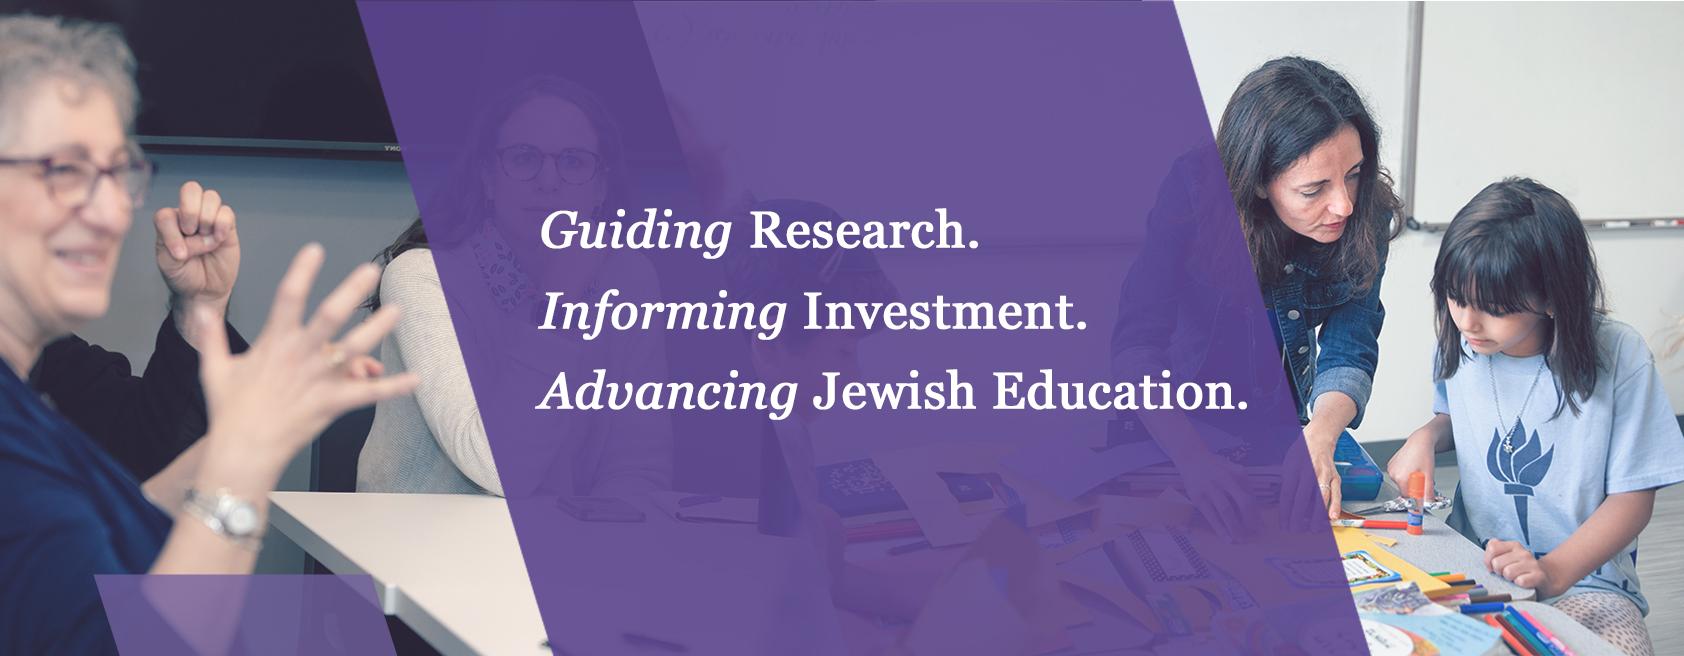 Decorative header that includes two photos of Jewish professionals in the background and a purple background that reads "Guiding Research. Informing Investment. Advancing Jewish Education."